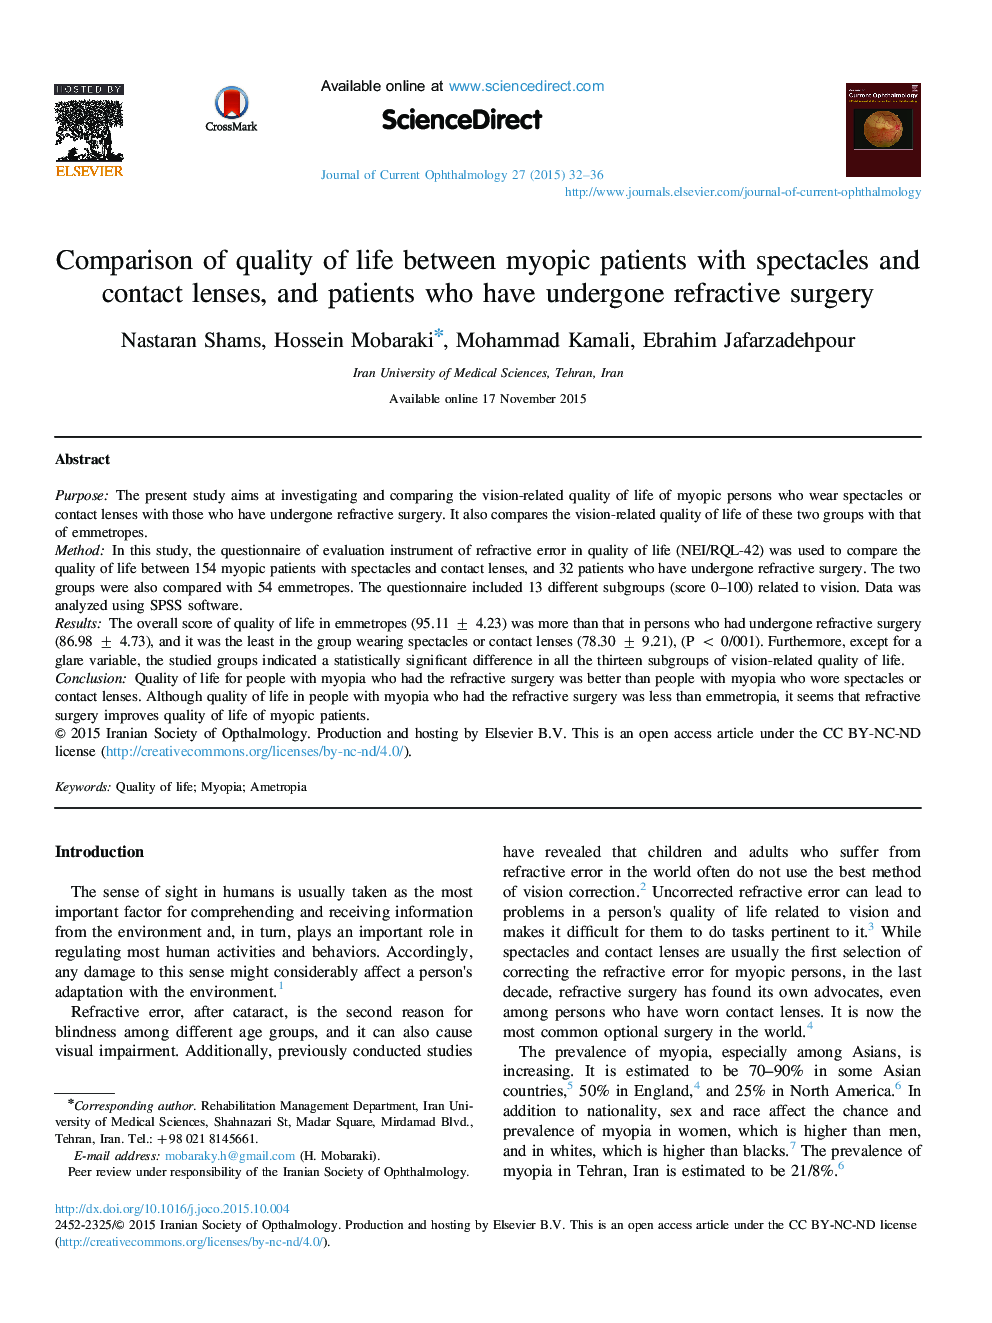 Comparison of quality of life between myopic patients with spectacles and contact lenses, and patients who have undergone refractive surgery 